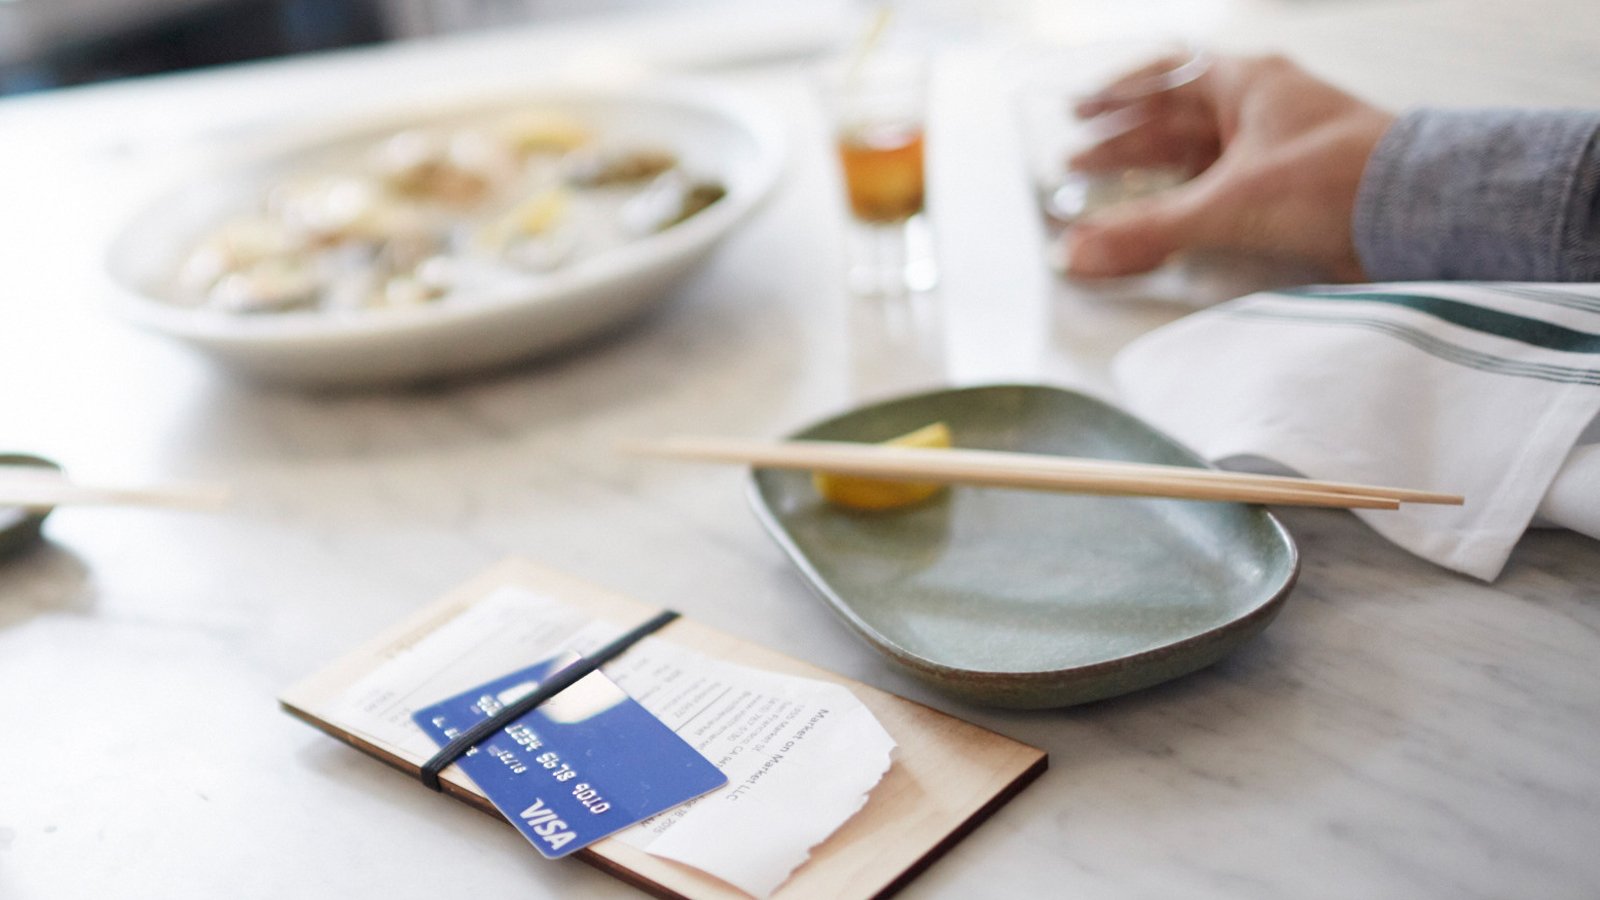 A restaurant table with plates of food and drinks showing a Visa card on top of a check.